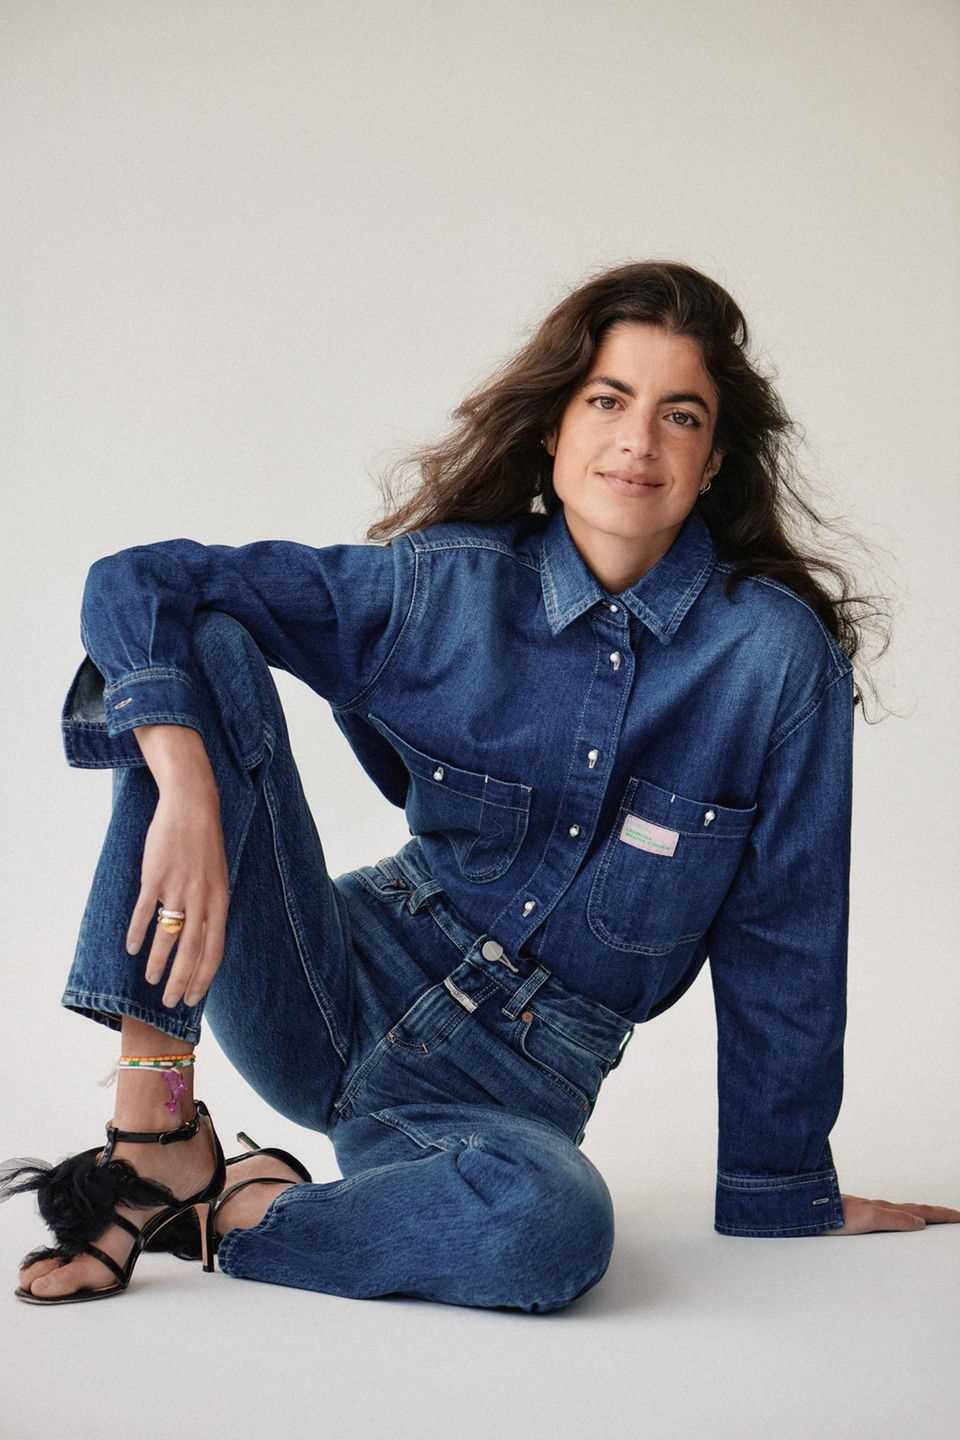 Leandra Medine Cohen's personal style is unmistakable - even when collaborating with Closed. 